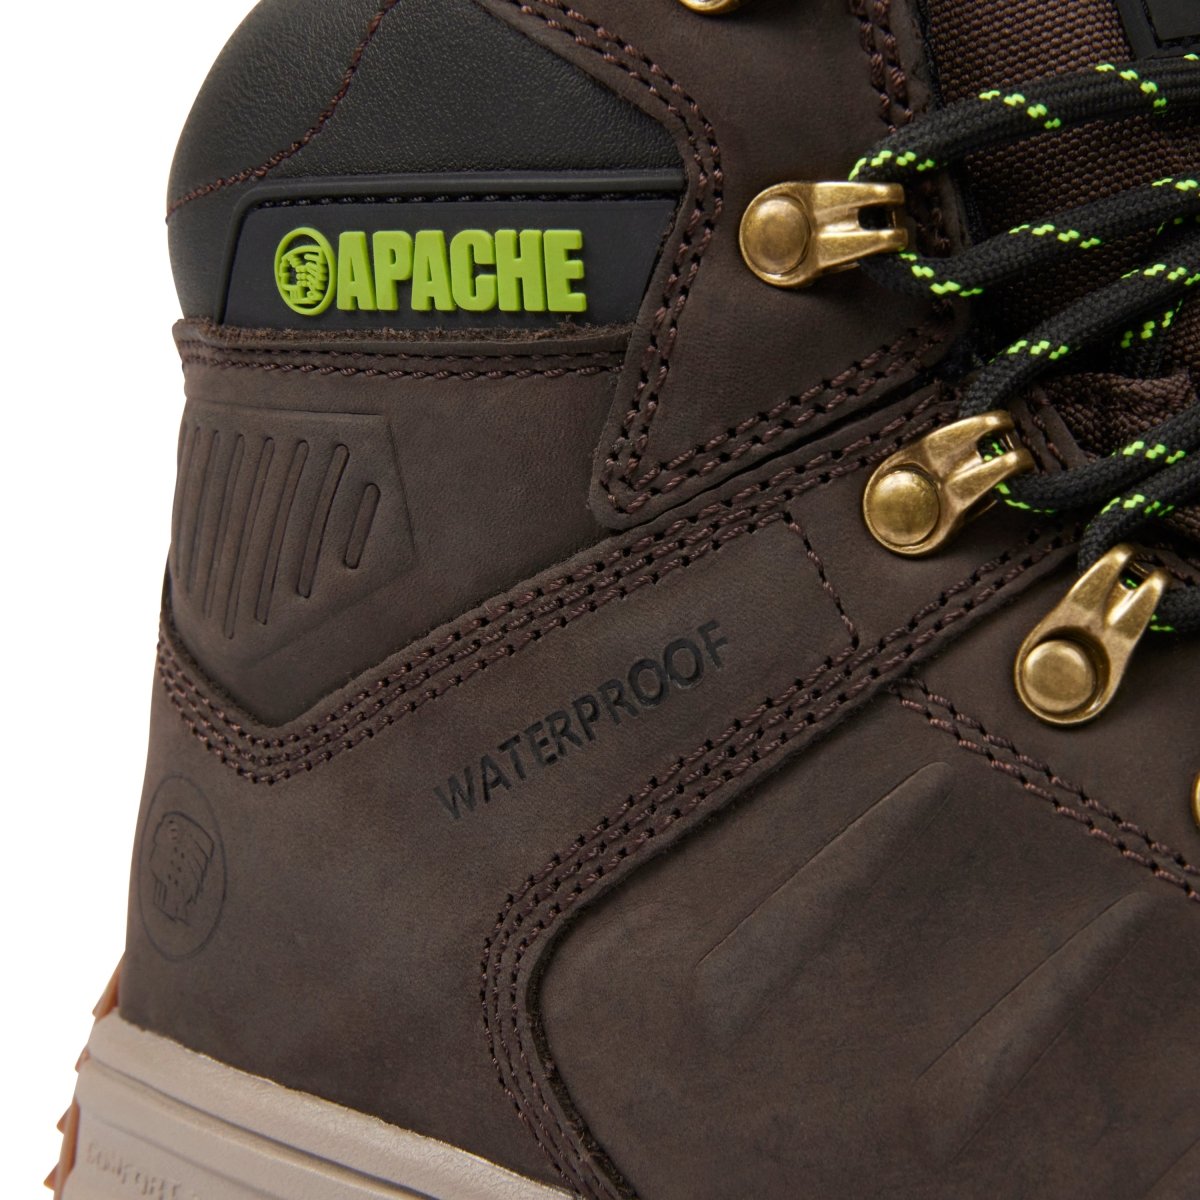 Apache Moose Jaw Leather Waterproof Safety Boot - Shoe Store Direct